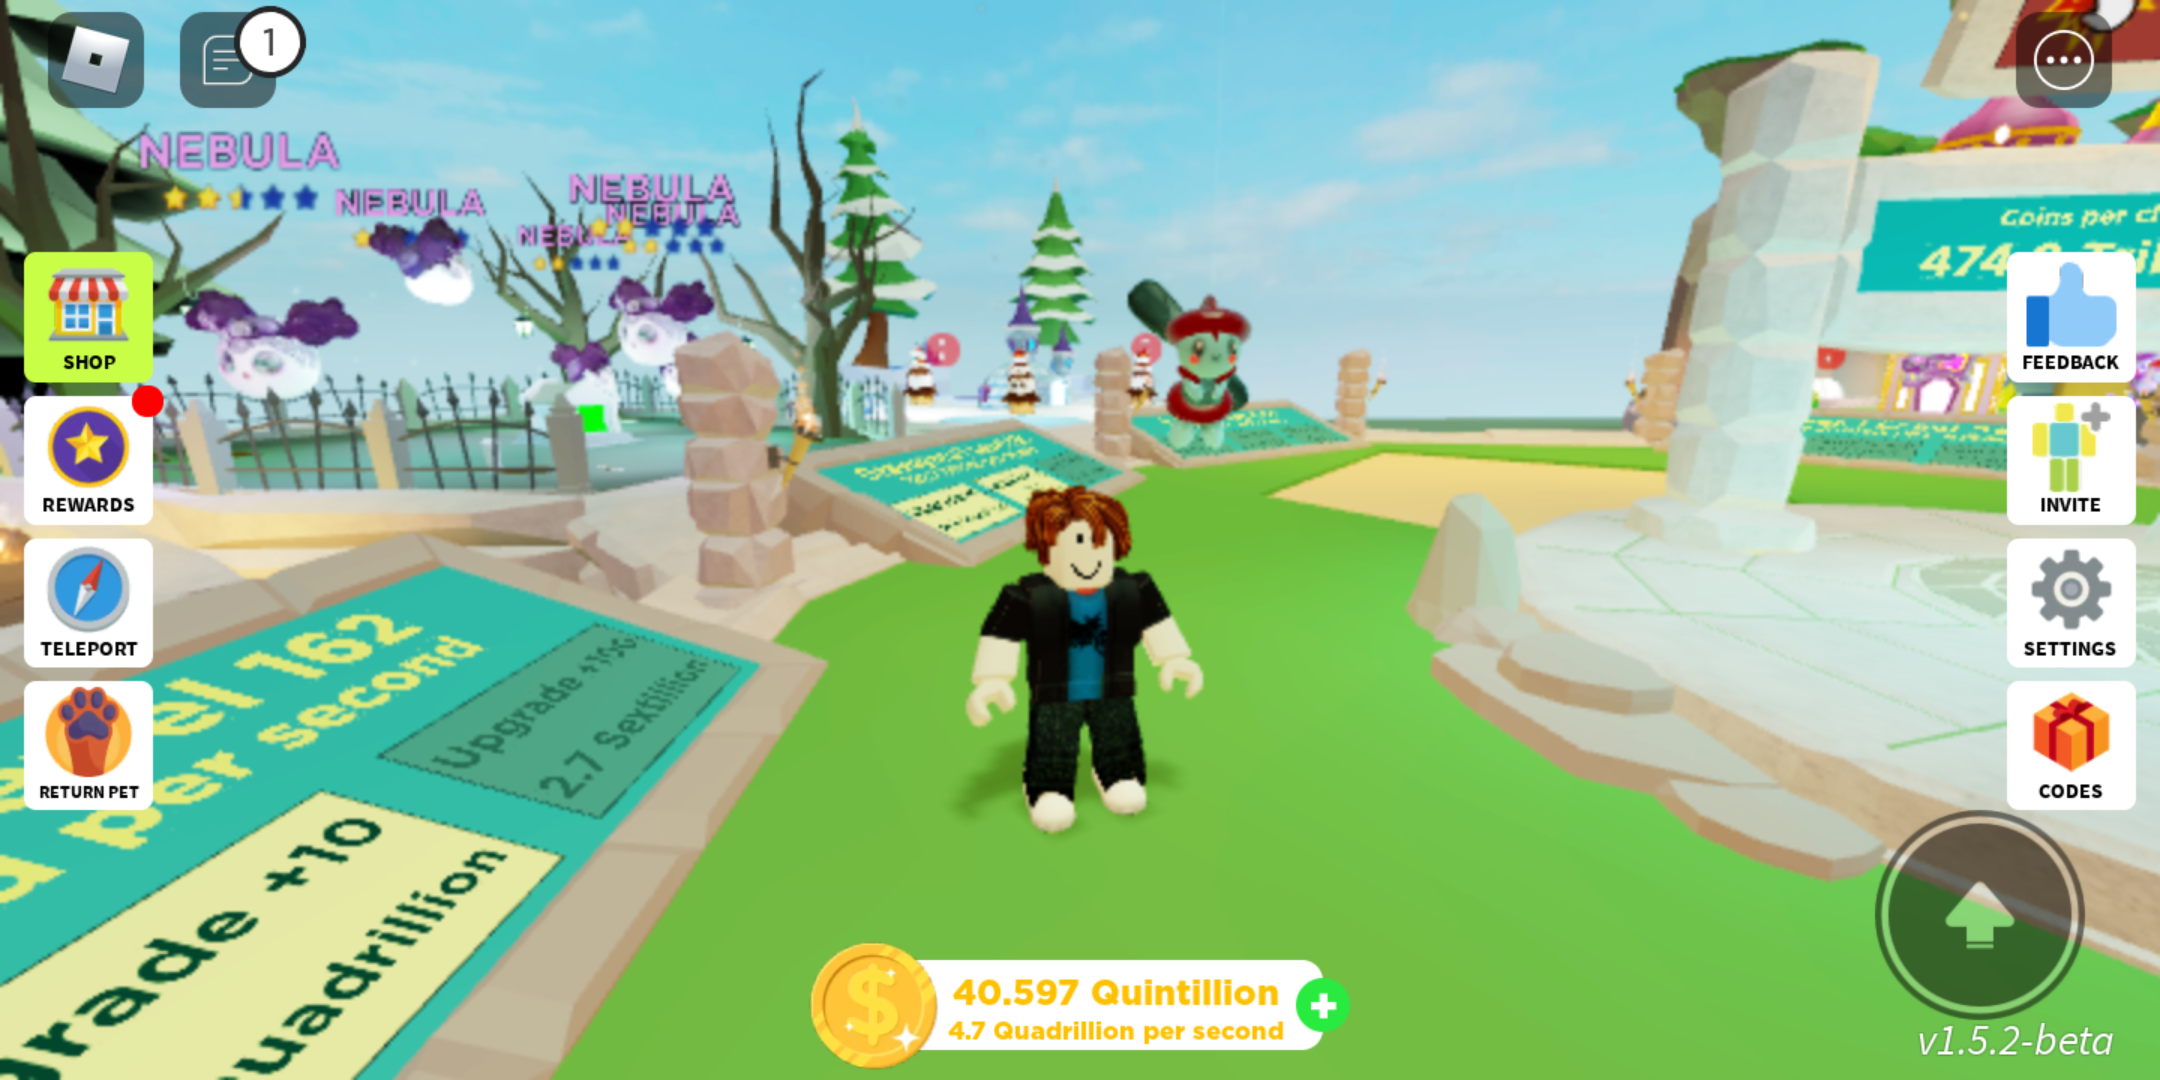 Roblox will give a handful of game developers $500,000 each to